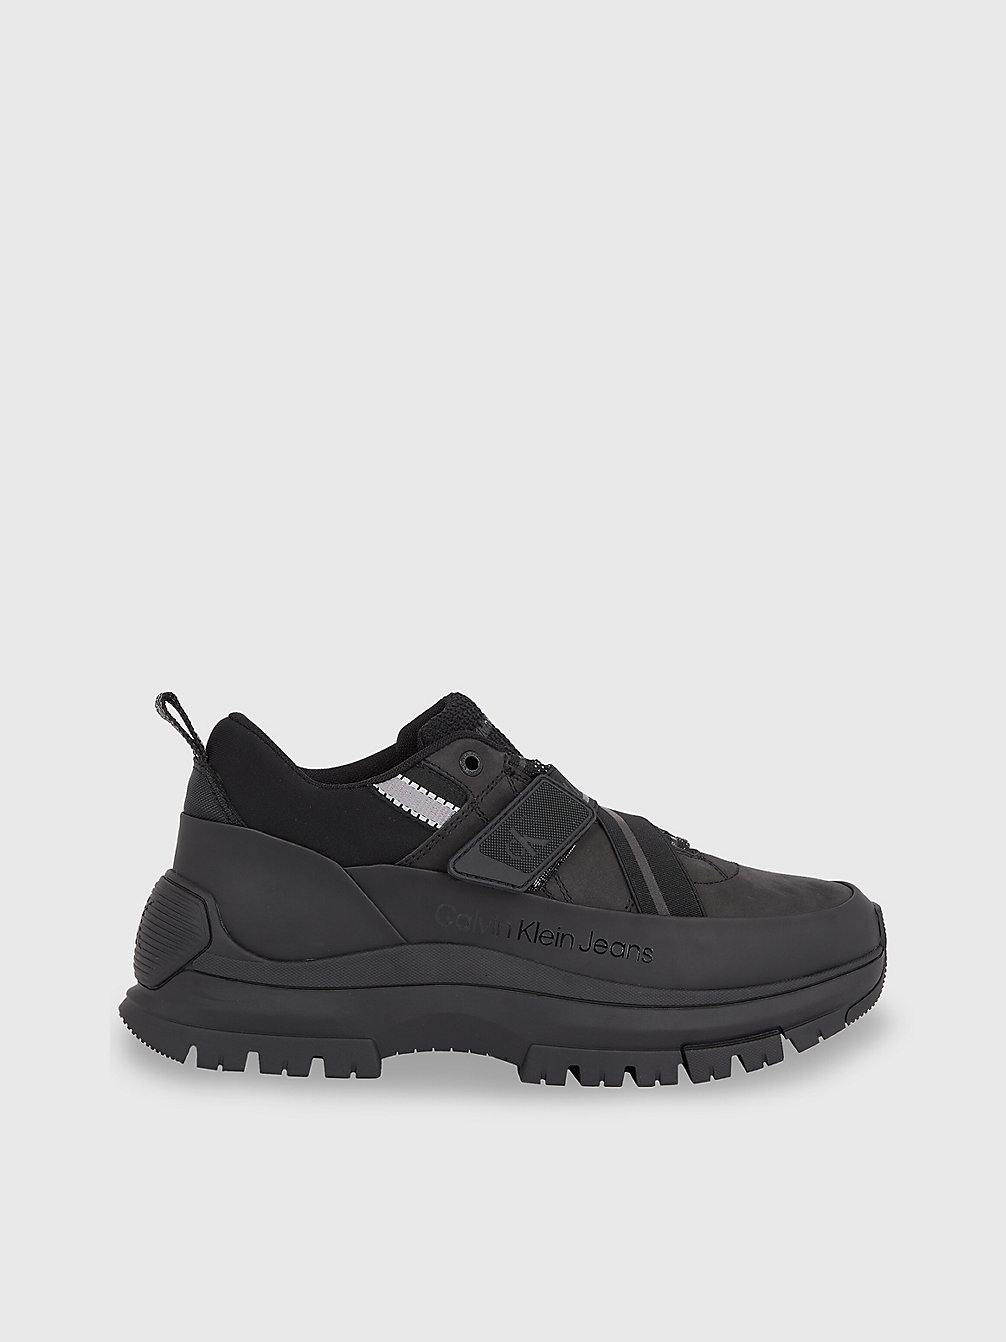 TRIPLE BLACK Recycled Trainers undefined men Calvin Klein